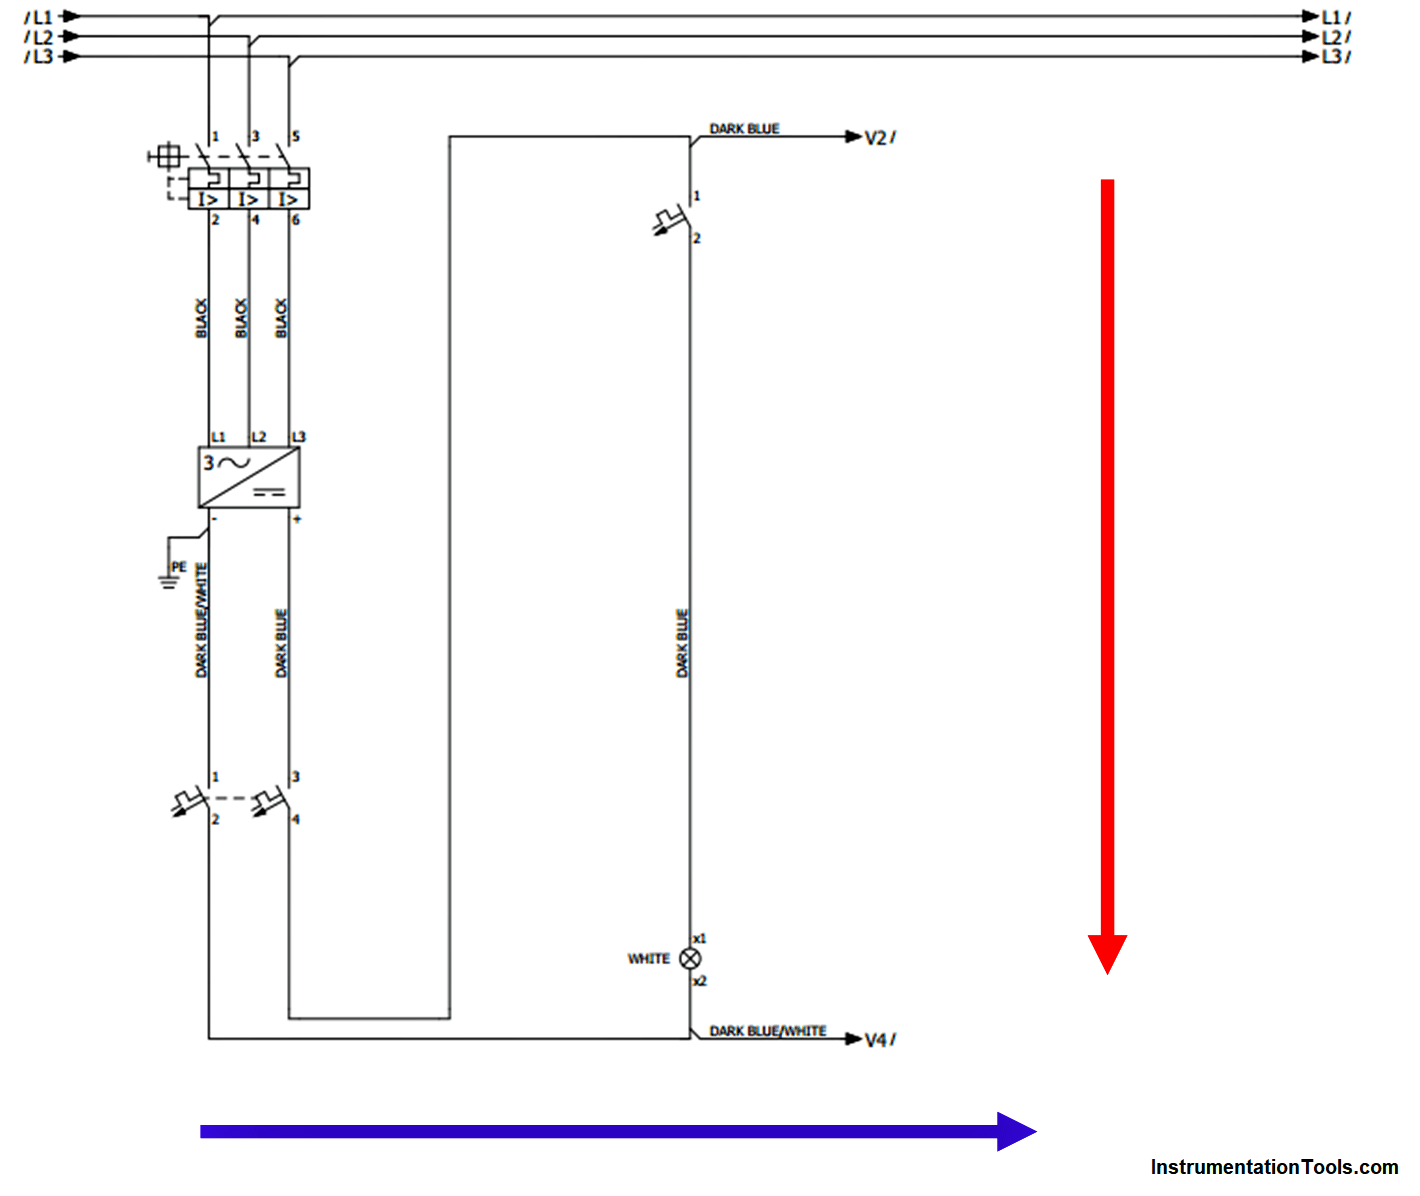 Direction of the Electrical drawing